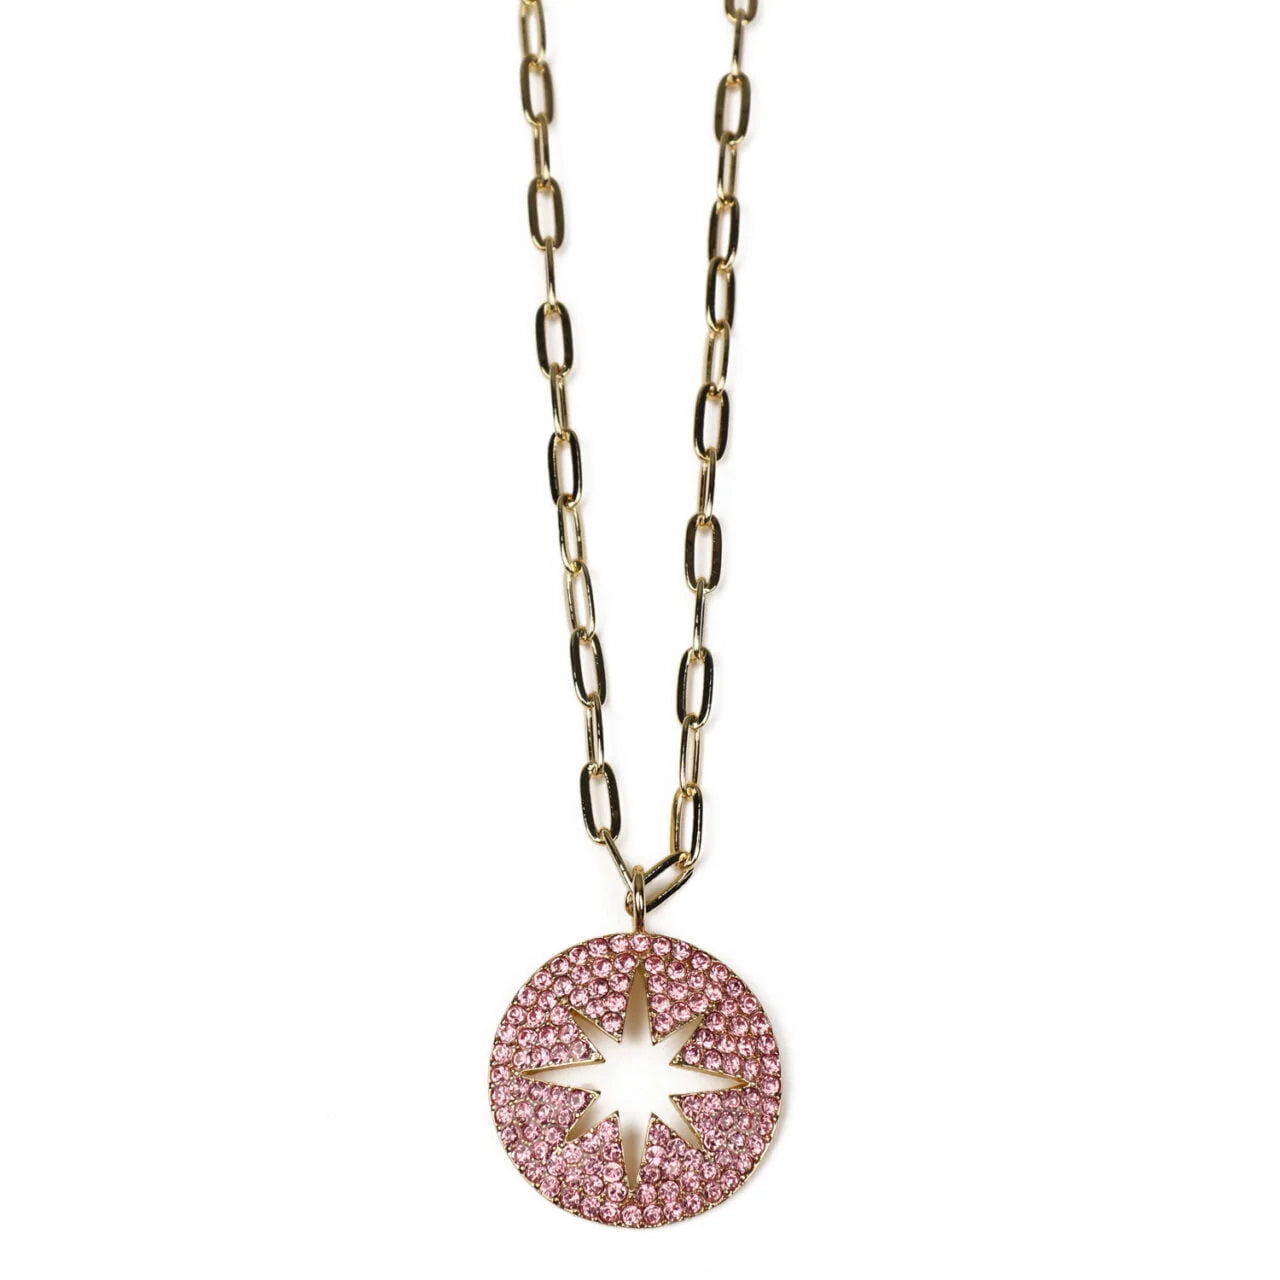 Fabulous Gifts Jewellery Necklace Star Burst Pink by Weirs of Baggot Street